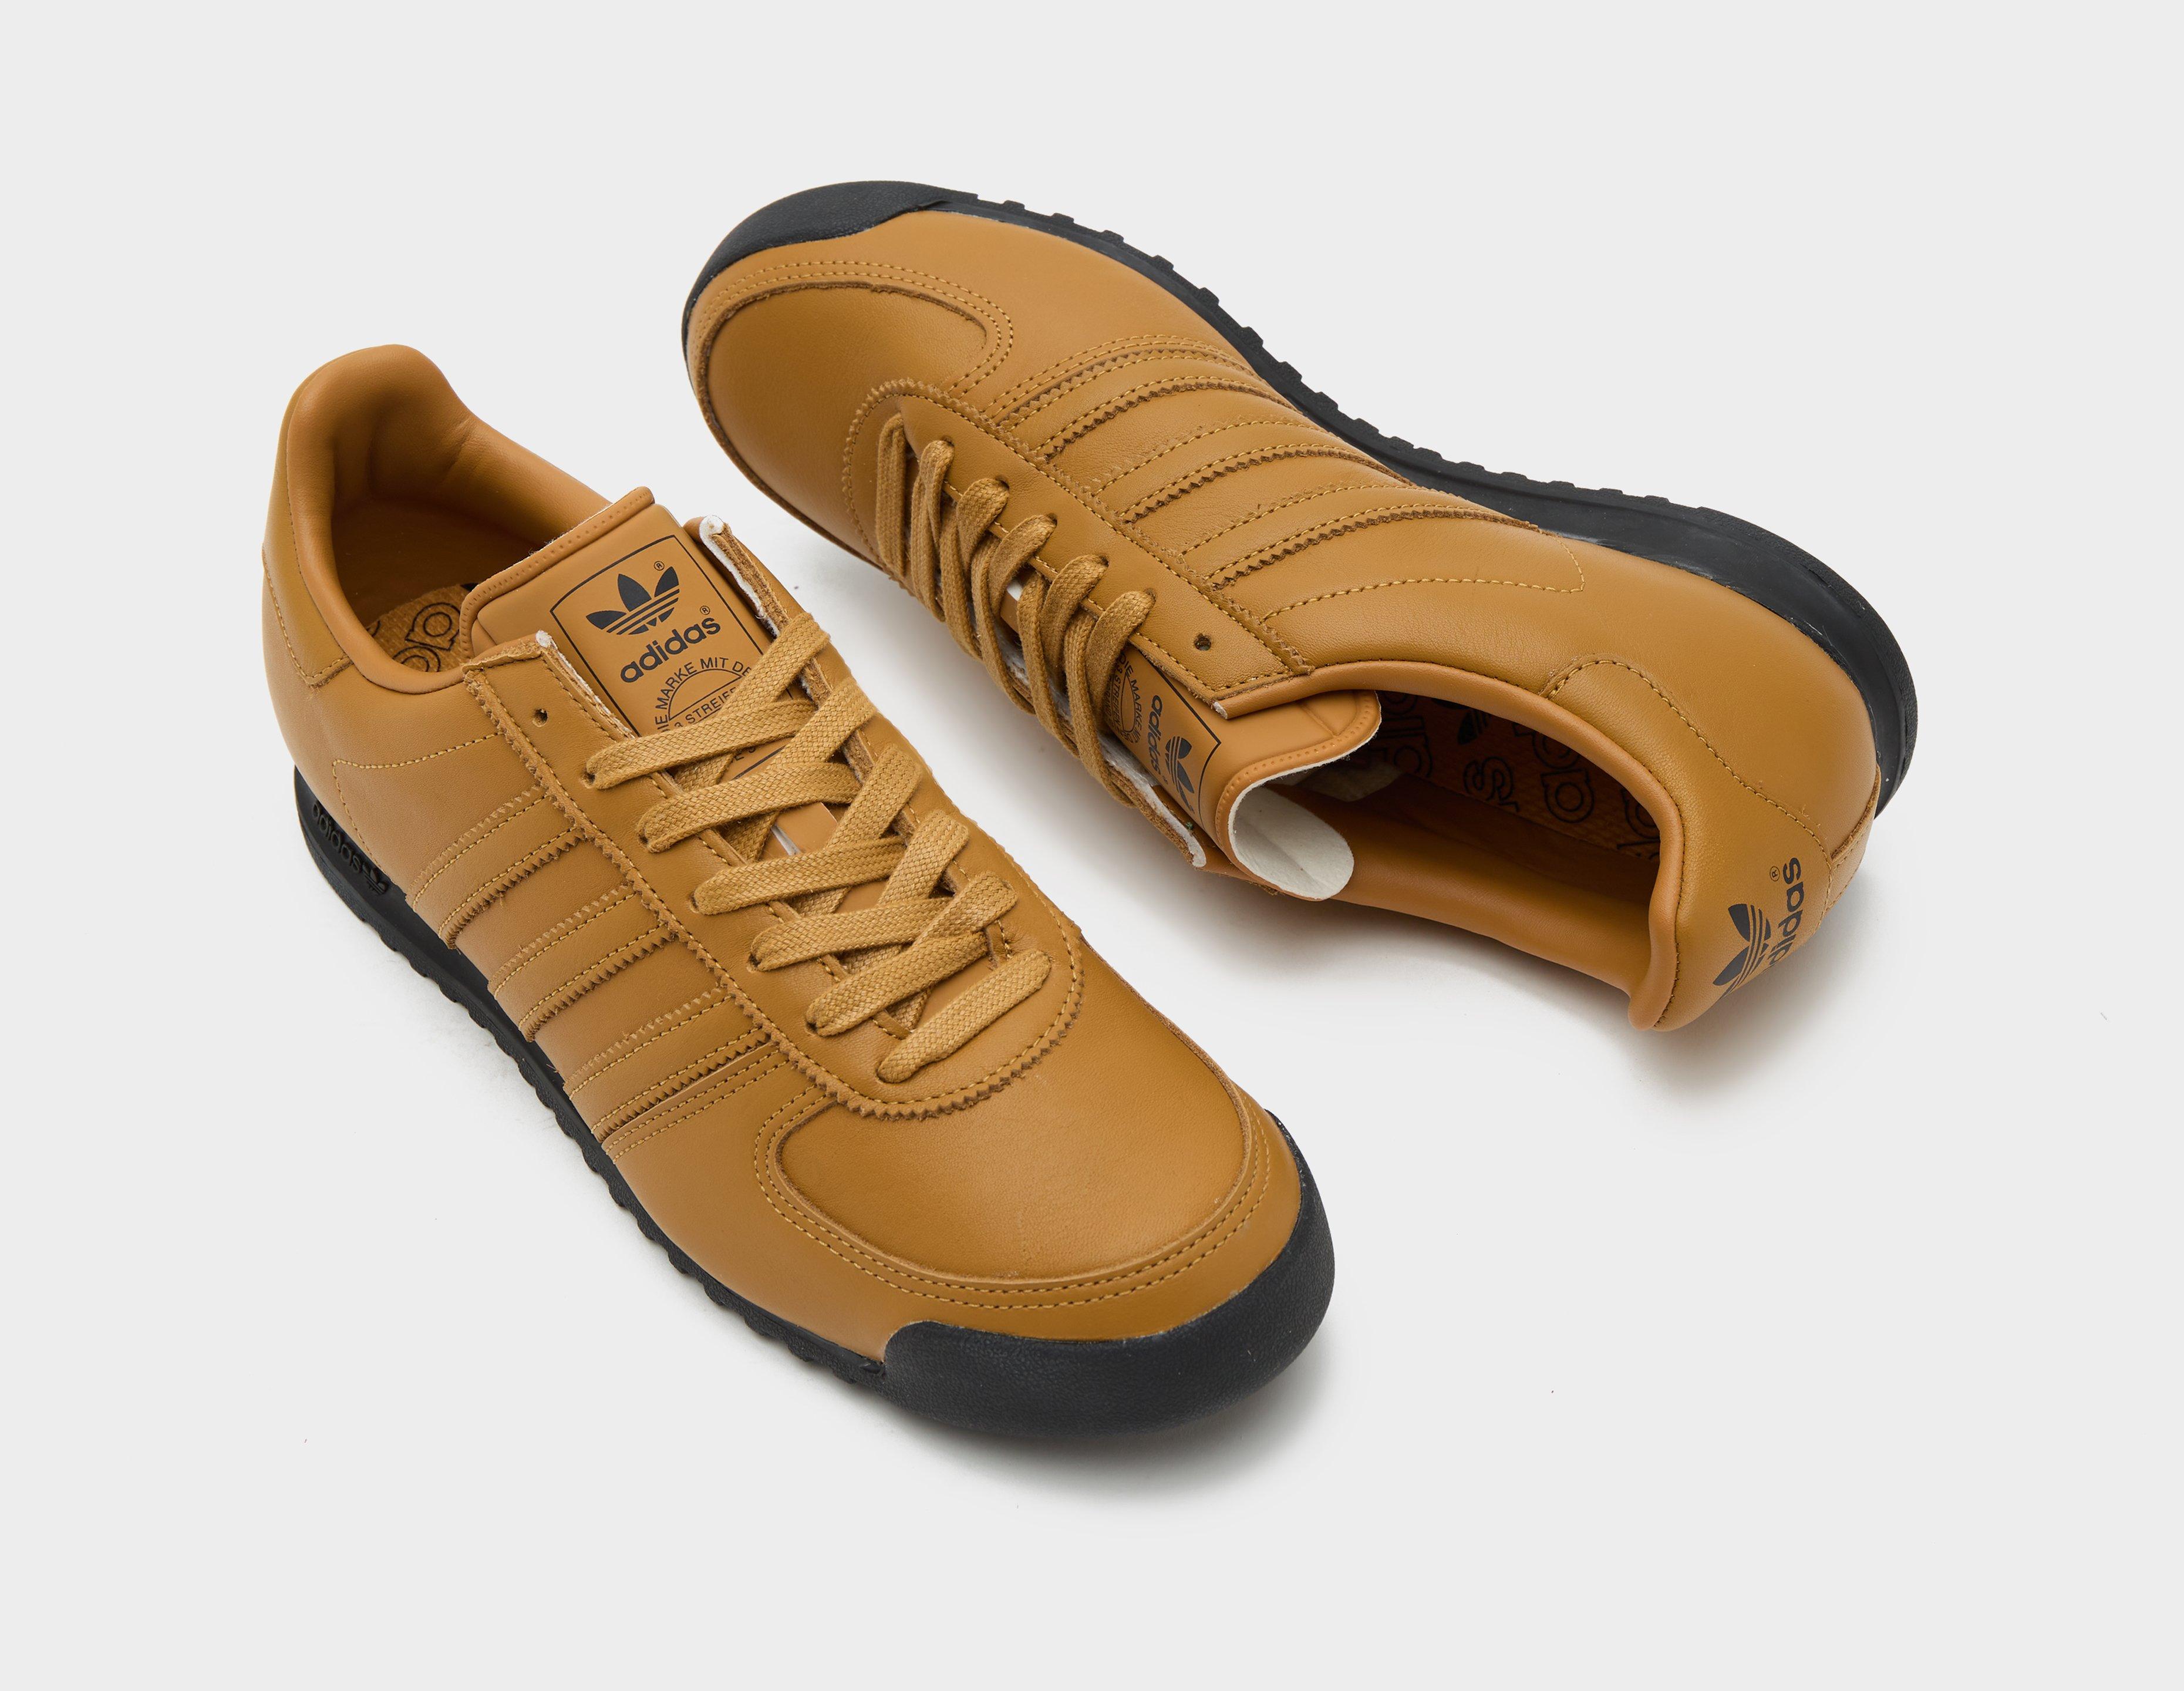 exclusive Women\'s | puma and dress adidas brands for women shoes sale -  Healthdesign? - Brown dress adidas Originals Archive All Team